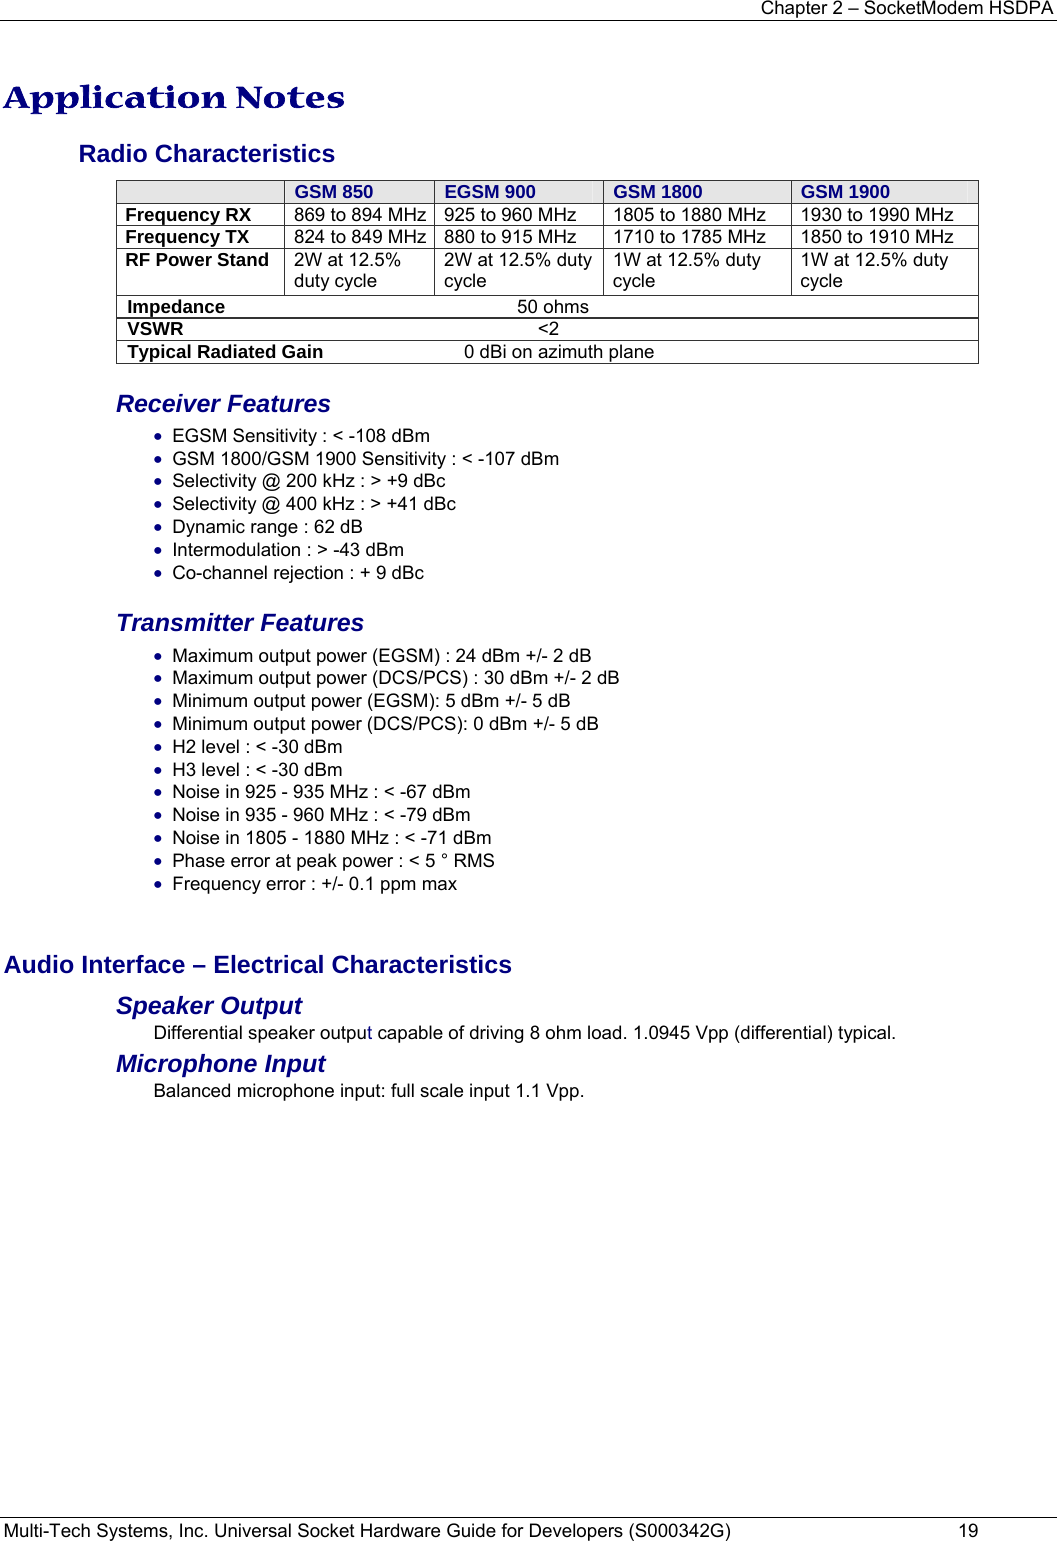 Chapter 2 – SocketModem HSDPA Multi-Tech Systems, Inc. Universal Socket Hardware Guide for Developers (S000342G)  19 Application Notes Radio Characteristics  GSM 850  EGSM 900  GSM 1800  GSM 1900 Frequency RX  869 to 894 MHz 925 to 960 MHz  1805 to 1880 MHz  1930 to 1990 MHz Frequency TX  824 to 849 MHz 880 to 915 MHz  1710 to 1785 MHz  1850 to 1910 MHz RF Power Stand  2W at 12.5% duty cycle 2W at 12.5% duty cycle 1W at 12.5% duty cycle 1W at 12.5% duty cycle Impedance                                                        50 ohms VSWR                                                                    &lt;2 Typical Radiated Gain                           0 dBi on azimuth plane Receiver Features • EGSM Sensitivity : &lt; -108 dBm • GSM 1800/GSM 1900 Sensitivity : &lt; -107 dBm • Selectivity @ 200 kHz : &gt; +9 dBc • Selectivity @ 400 kHz : &gt; +41 dBc • Dynamic range : 62 dB • Intermodulation : &gt; -43 dBm • Co-channel rejection : + 9 dBc Transmitter Features • Maximum output power (EGSM) : 24 dBm +/- 2 dB • Maximum output power (DCS/PCS) : 30 dBm +/- 2 dB • Minimum output power (EGSM): 5 dBm +/- 5 dB • Minimum output power (DCS/PCS): 0 dBm +/- 5 dB • H2 level : &lt; -30 dBm • H3 level : &lt; -30 dBm • Noise in 925 - 935 MHz : &lt; -67 dBm • Noise in 935 - 960 MHz : &lt; -79 dBm • Noise in 1805 - 1880 MHz : &lt; -71 dBm • Phase error at peak power : &lt; 5 ° RMS • Frequency error : +/- 0.1 ppm max  Audio Interface – Electrical Characteristics Speaker Output  Differential speaker output capable of driving 8 ohm load. 1.0945 Vpp (differential) typical. Microphone Input  Balanced microphone input: full scale input 1.1 Vpp.    